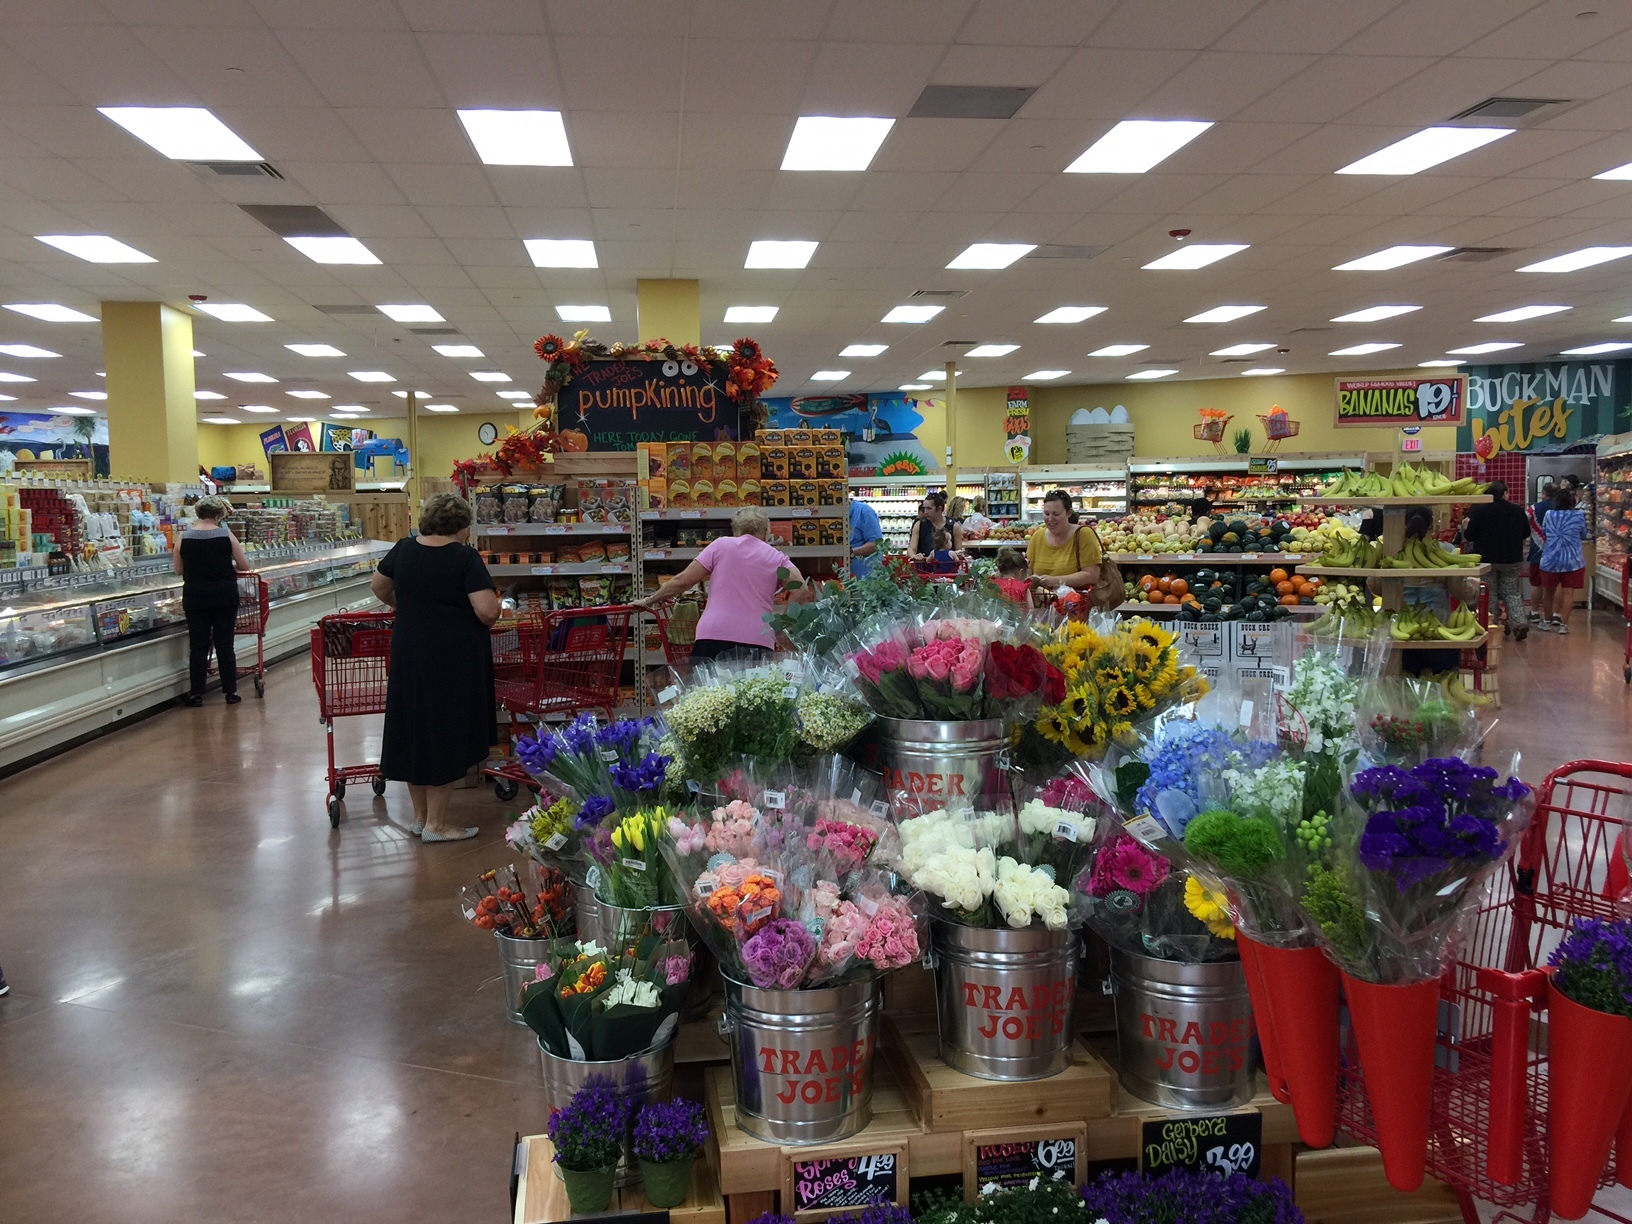 Trader Joe’s opened last week in Claire Lane Center. It’s the second area store for the California-based chain.